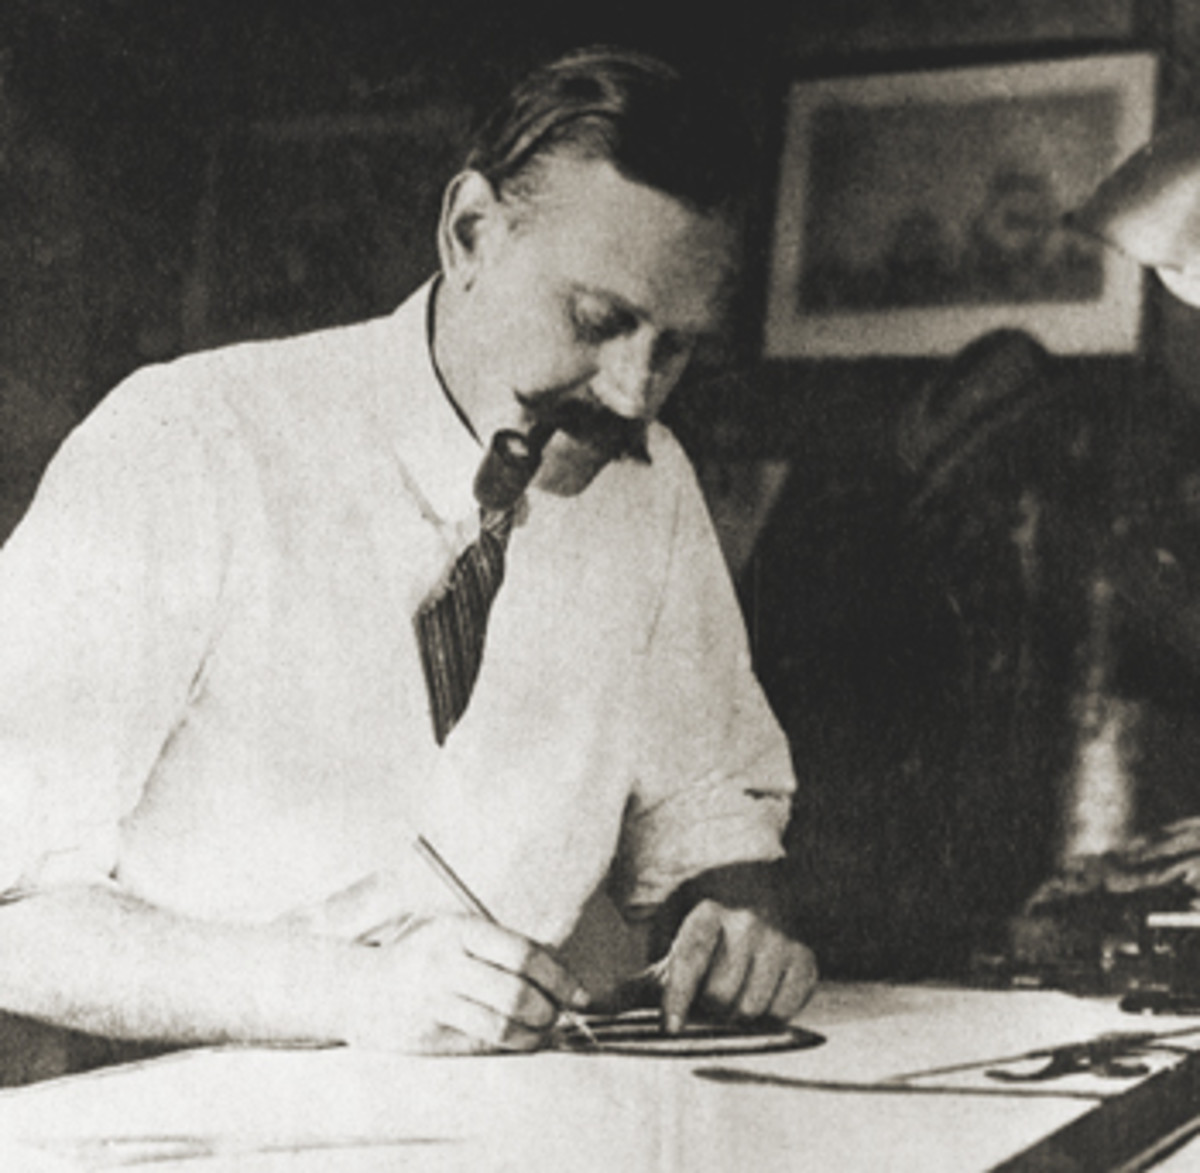 L. Francis at his drafting board at Burgess, Swasey and Paine in 1925.